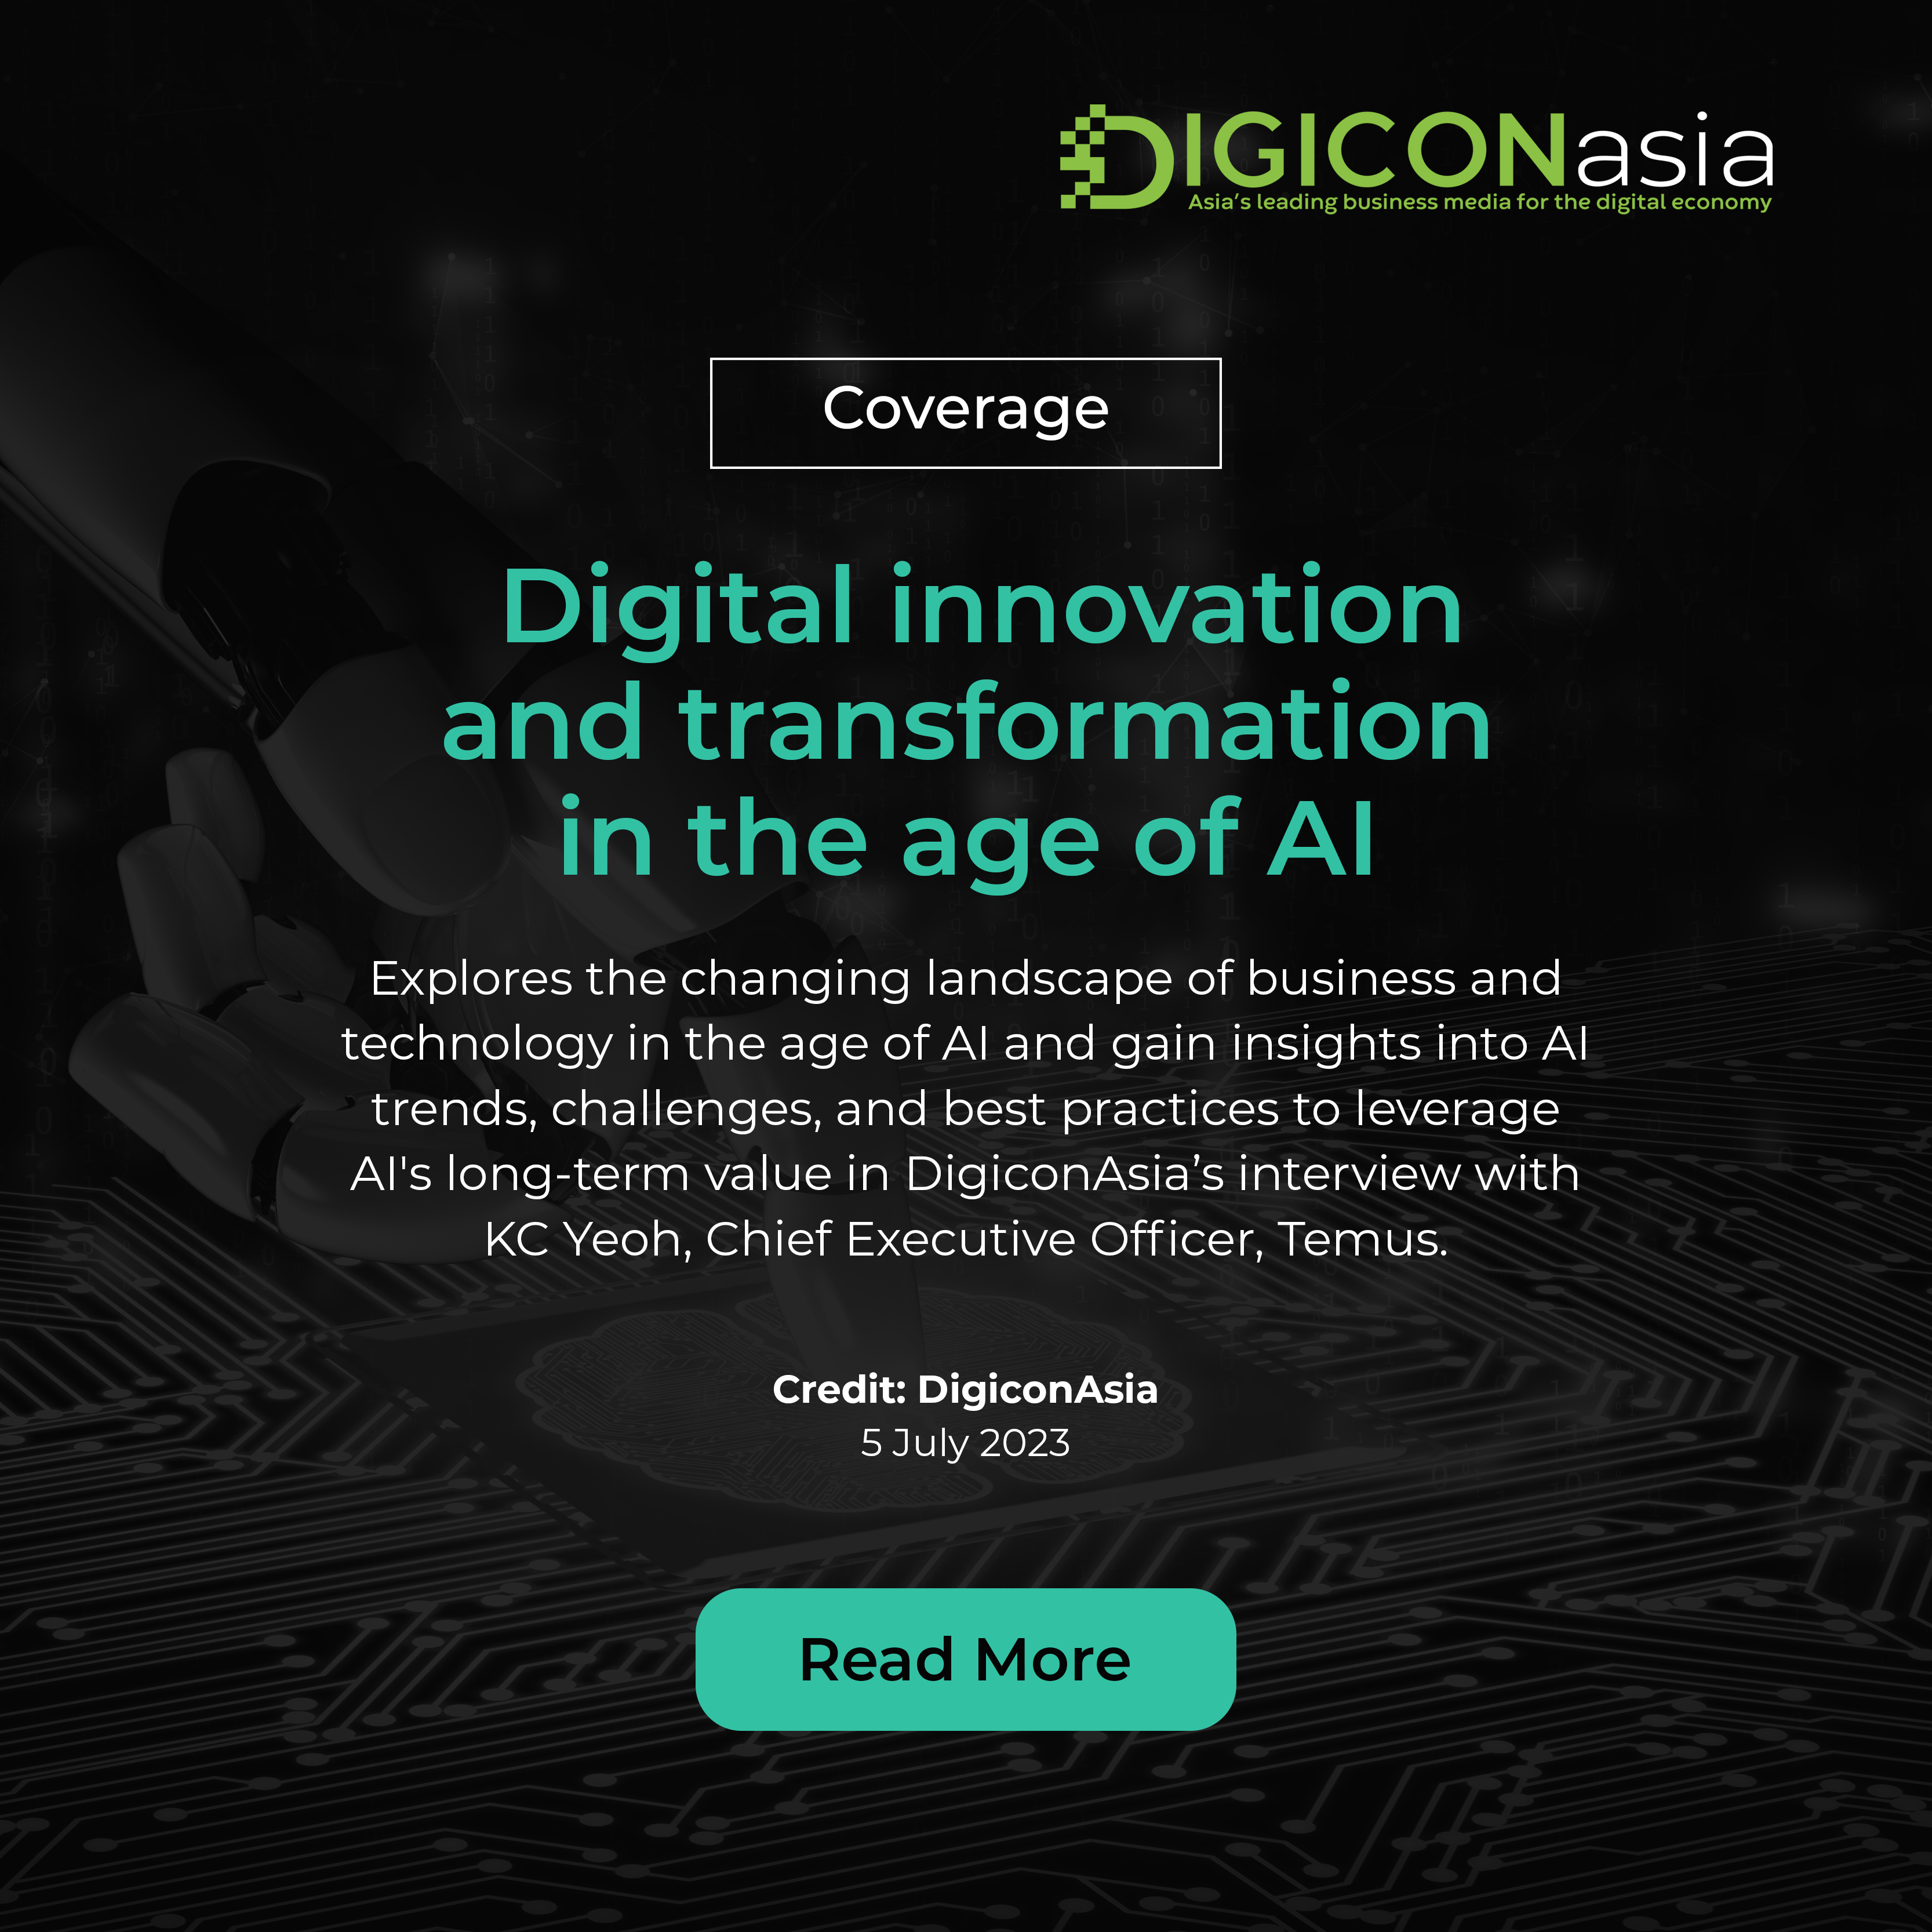 Coverage (DigiconAsia): Digital innovation and transformation in the age of AI 